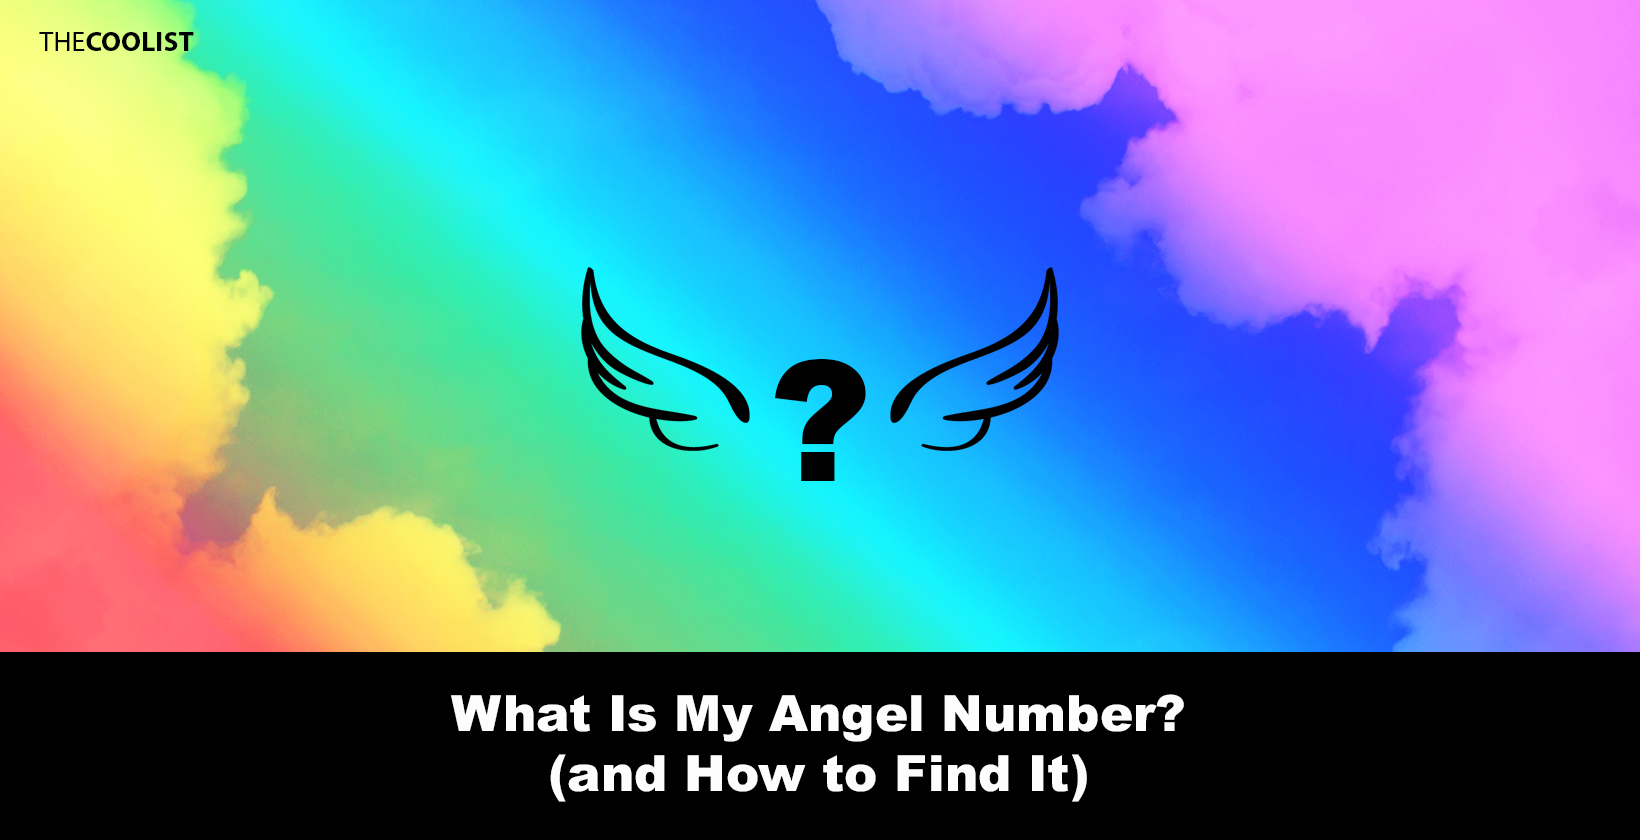 What Is My Angel Number? (Calculator)